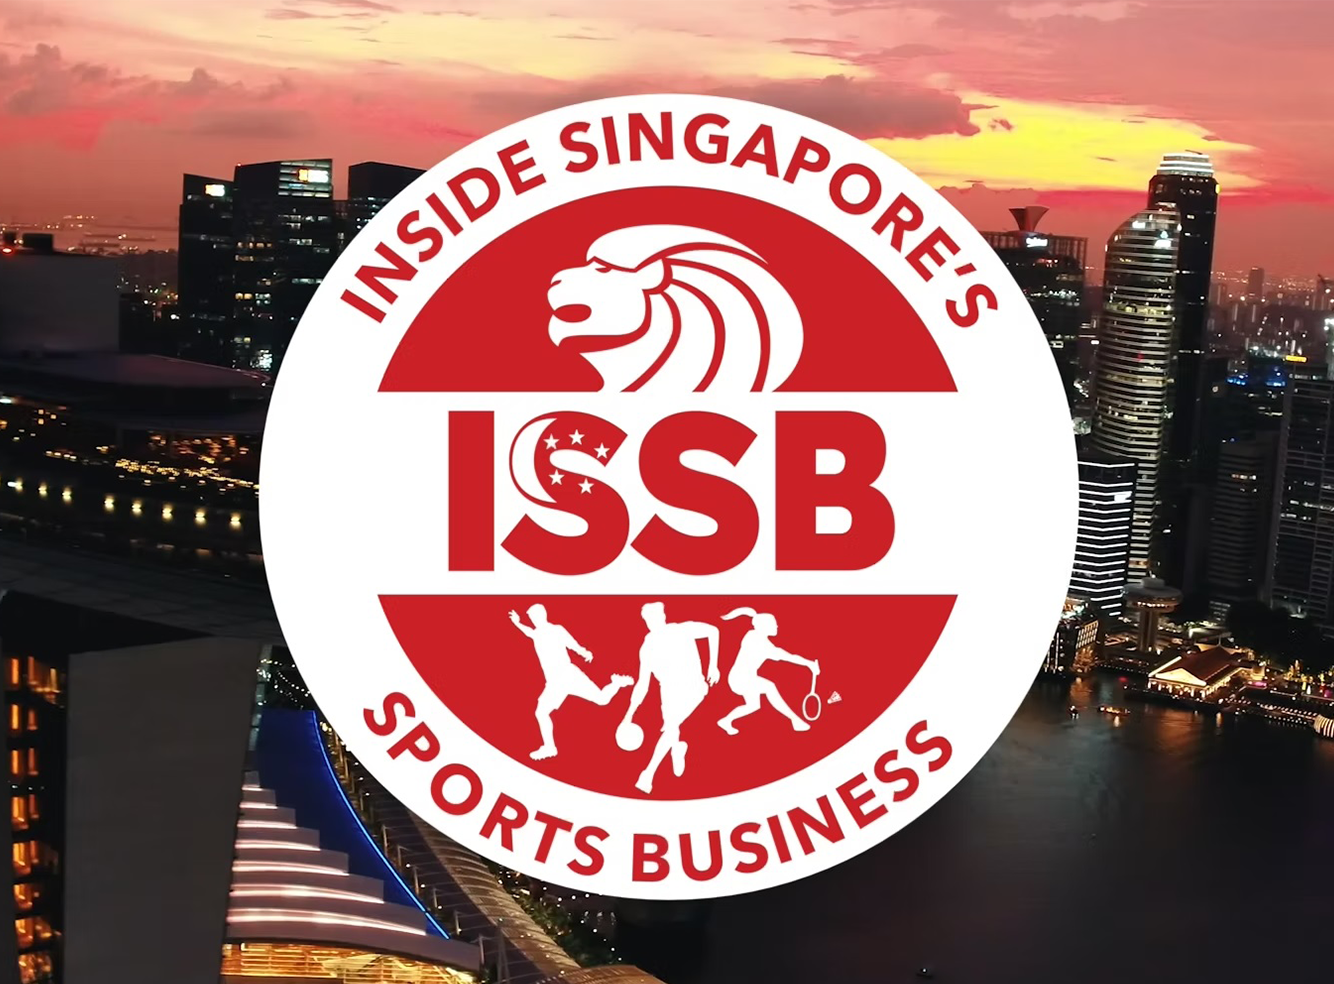 Inside Singapore's Sports Business (ISSB)